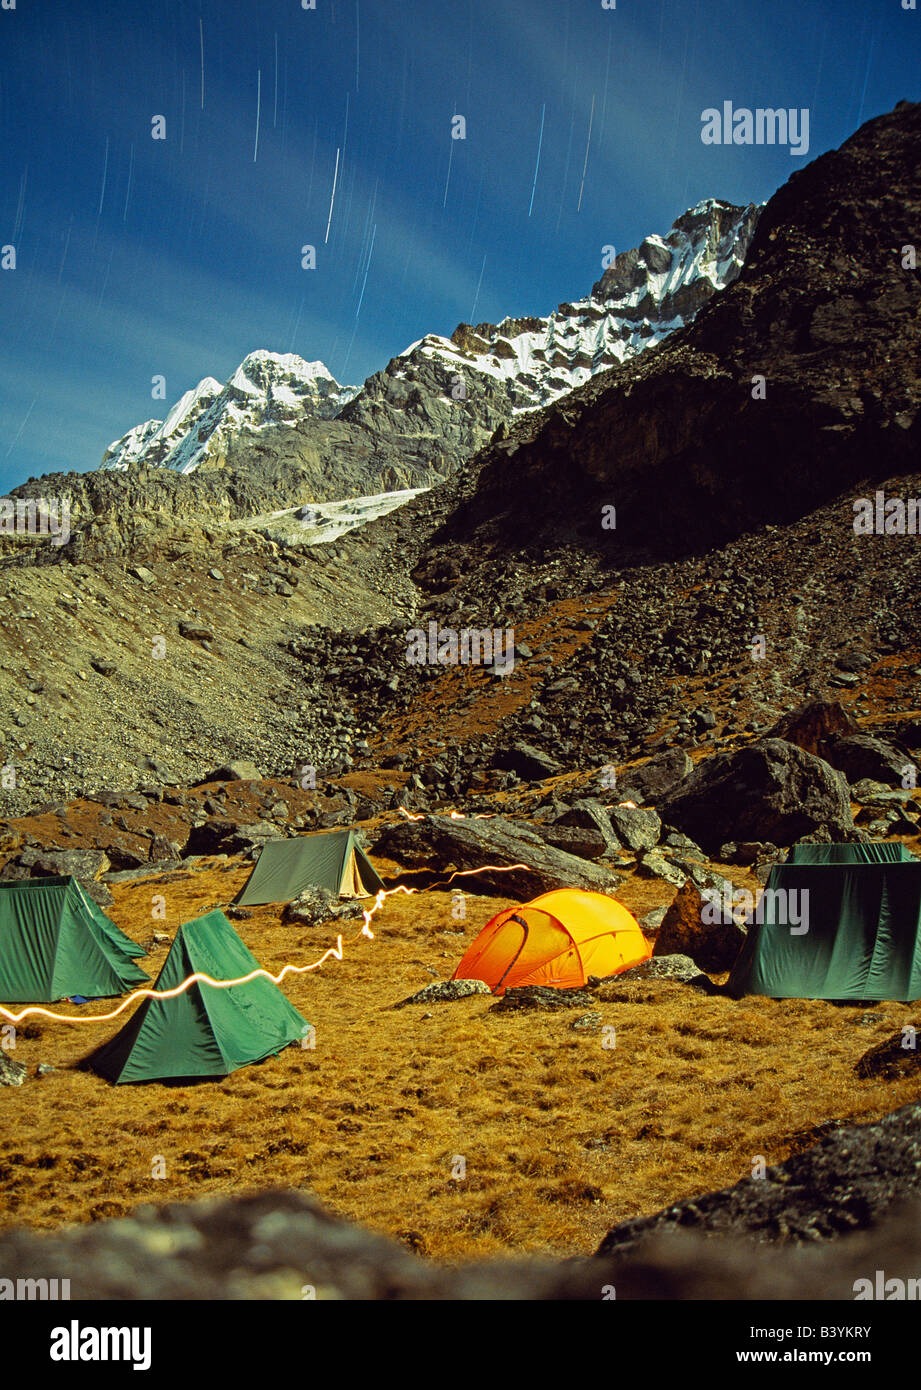 Nepal, Solo-Khumbu, Khare (Mera Peak Basecamp). Nighttime shot of tents at Mera Base Camp at Khare (5000m). Star trails are visable in the sky as is the path of a torch held by a camper. Stock Photo